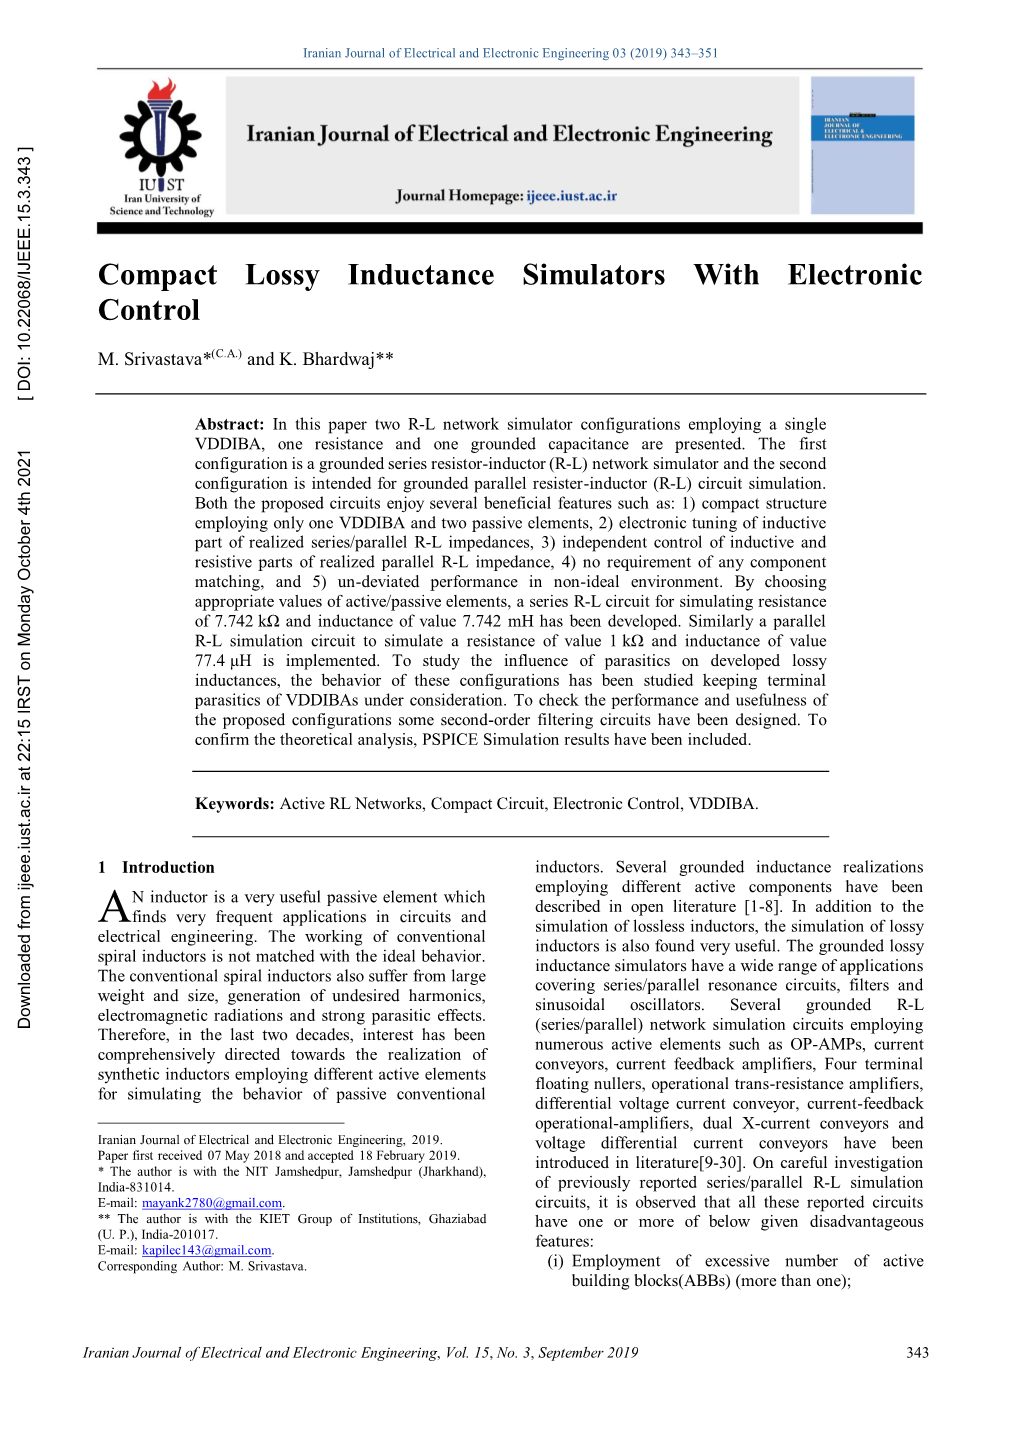 Compact Lossy Inductance Simulators with Electronic Control